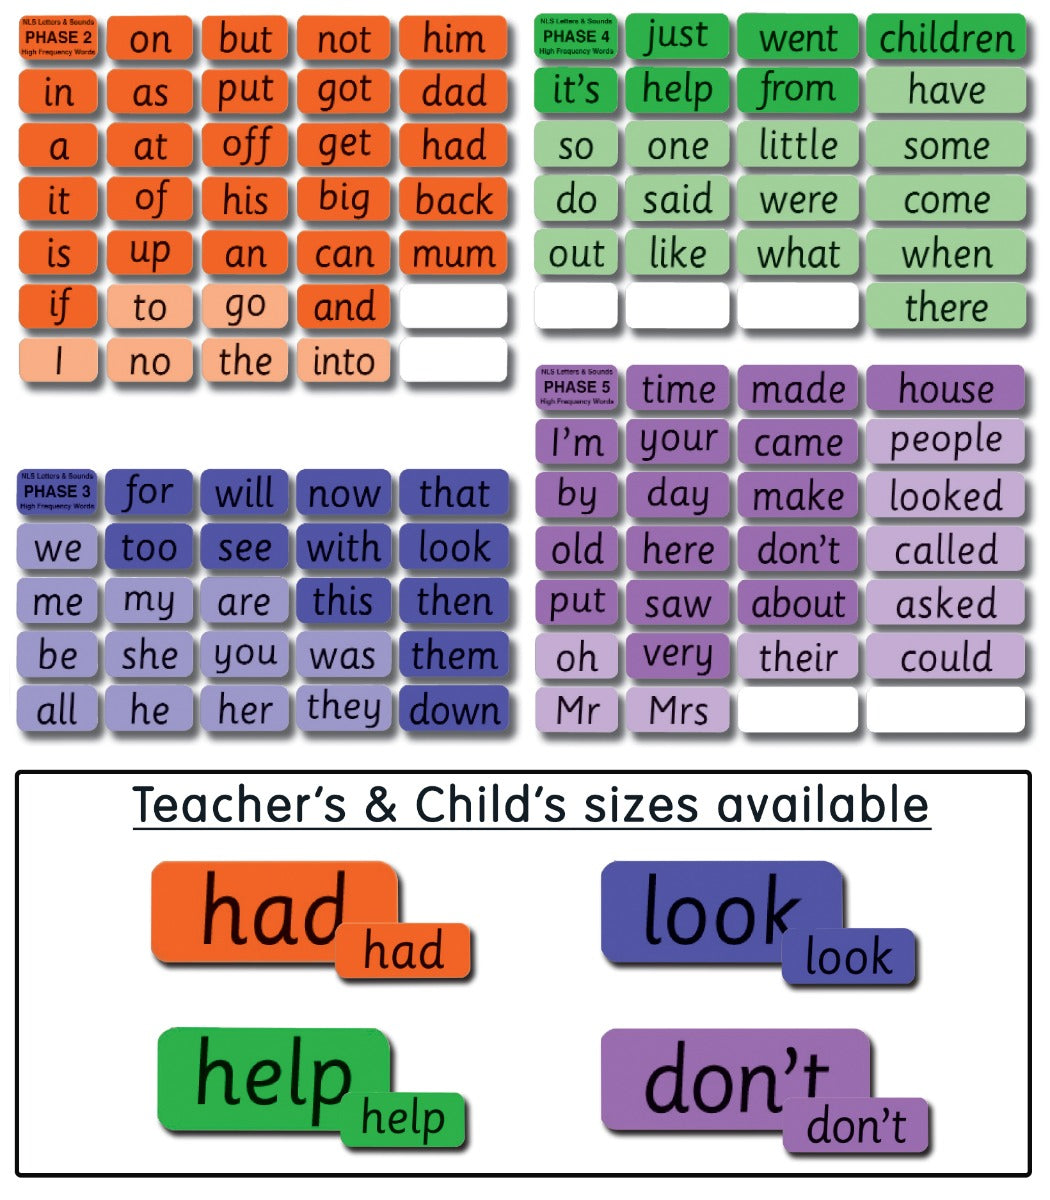 TEACHER’S HIGH FREQUENCY WORD CARD SET, PHASE 2 – 5